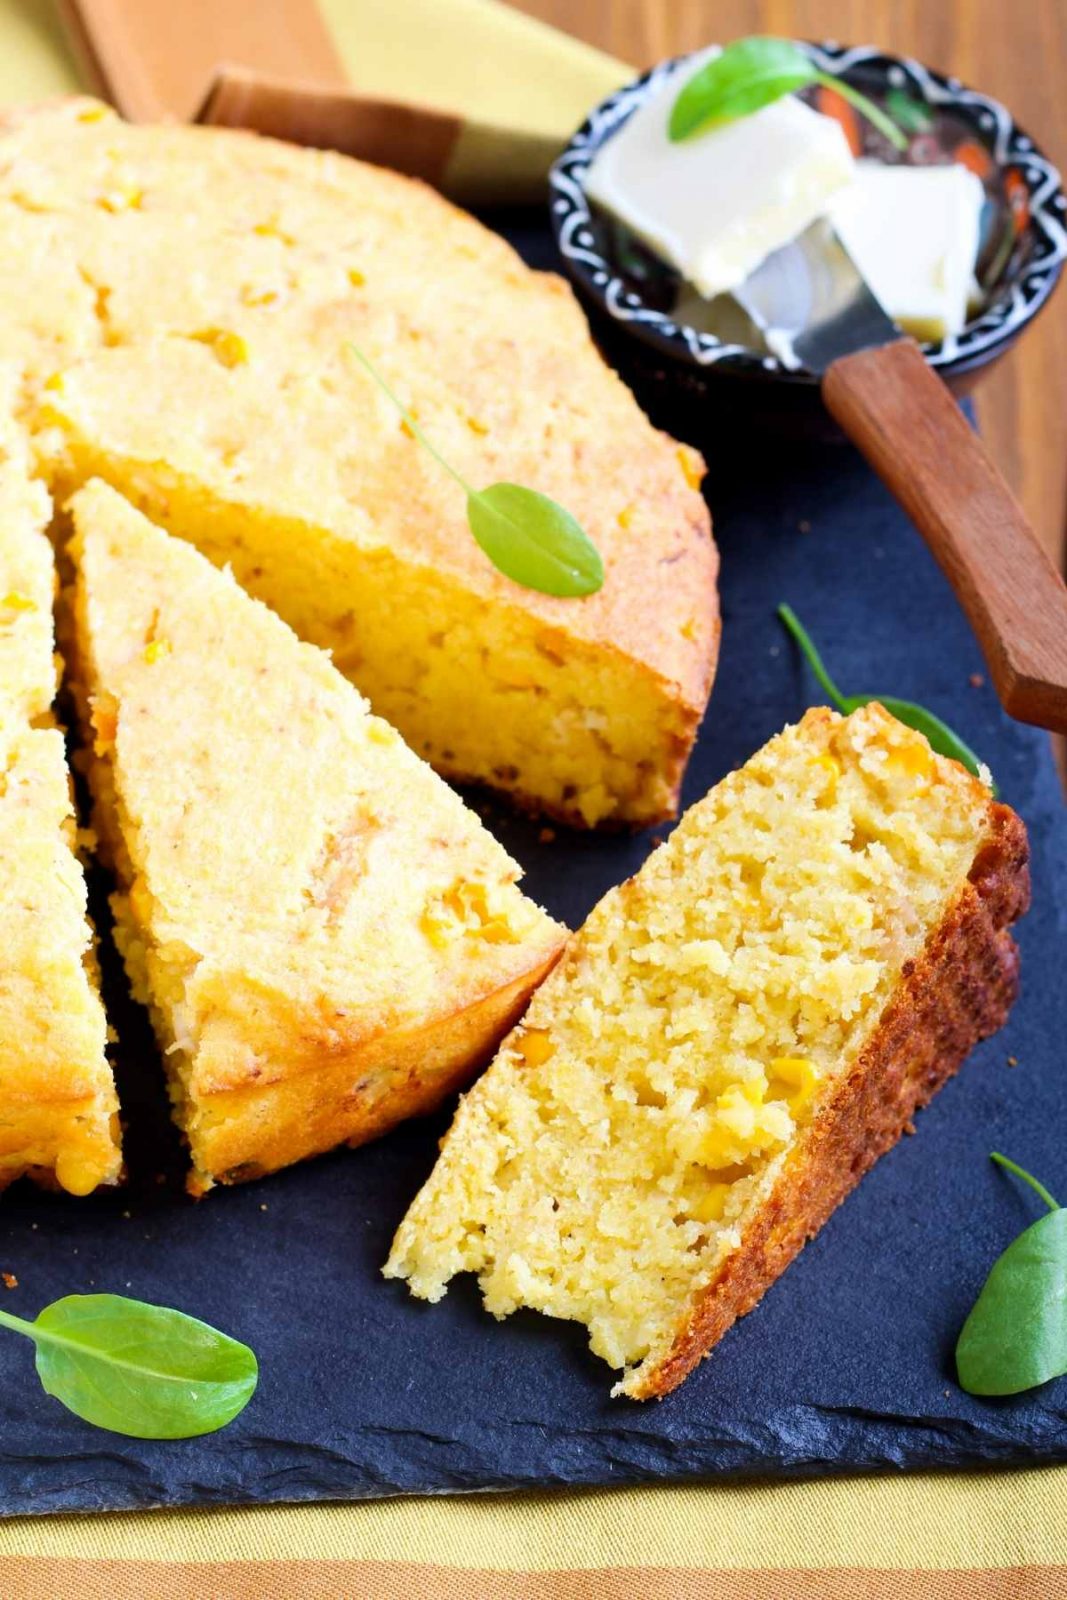 There's something special about freshly baked cornbread warm out of the oven. This cornbread cake is sweet, moist, and can be topped with a creamy frosting.